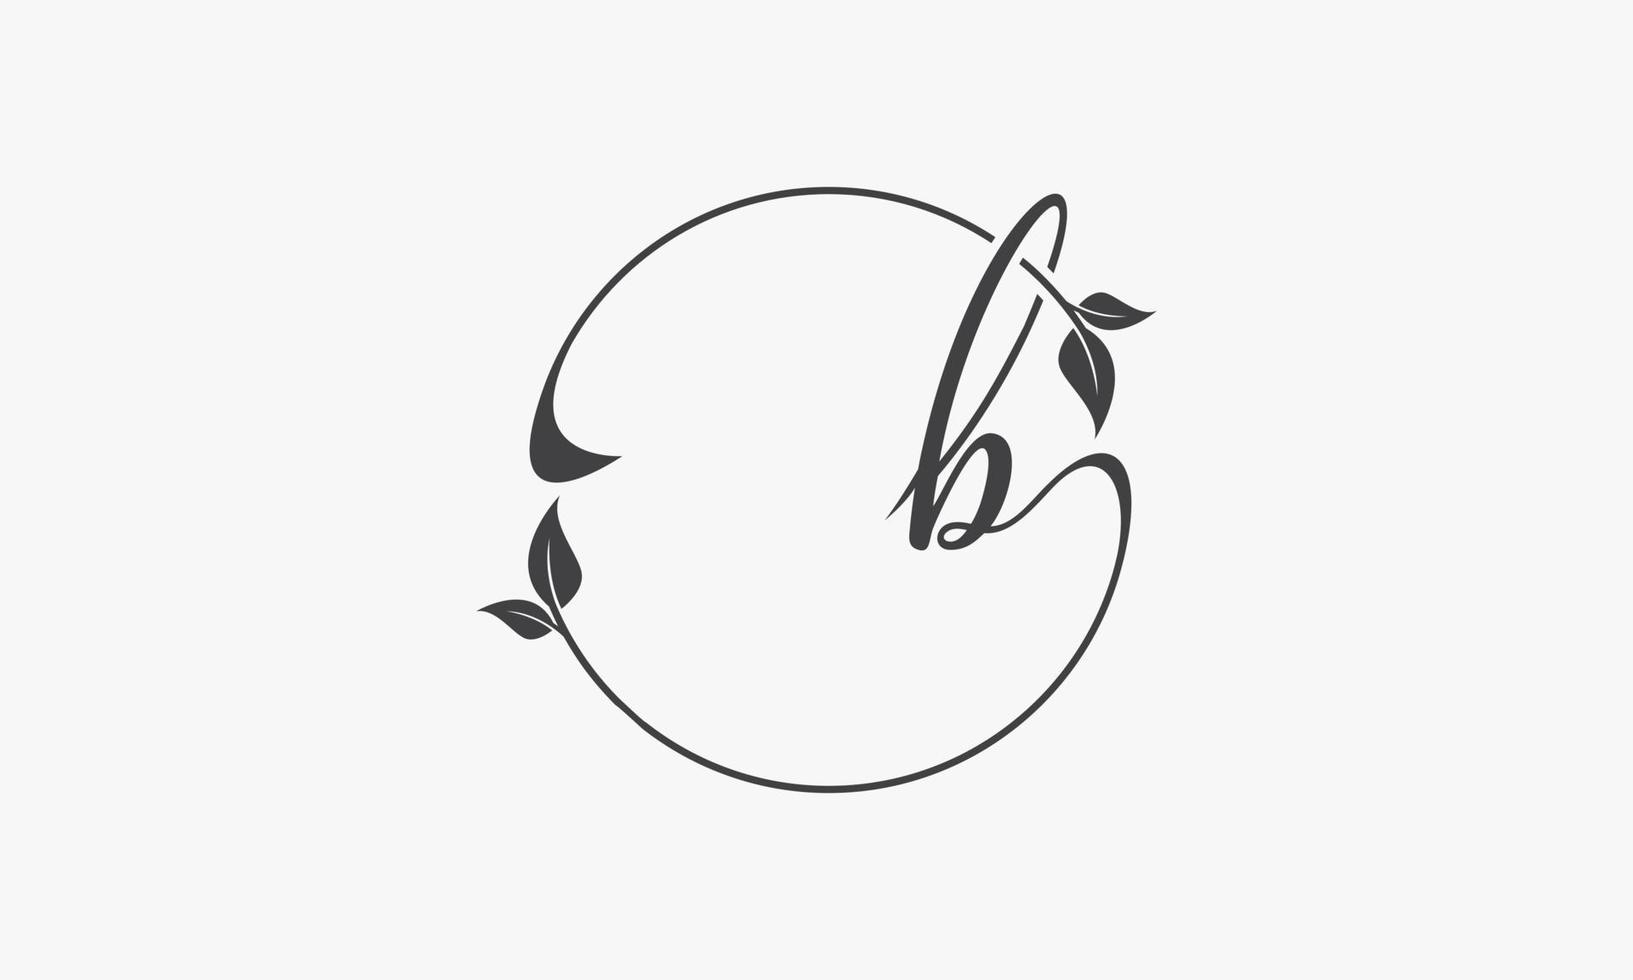 B letter handwriting circle leaf graphic logo concept. vector